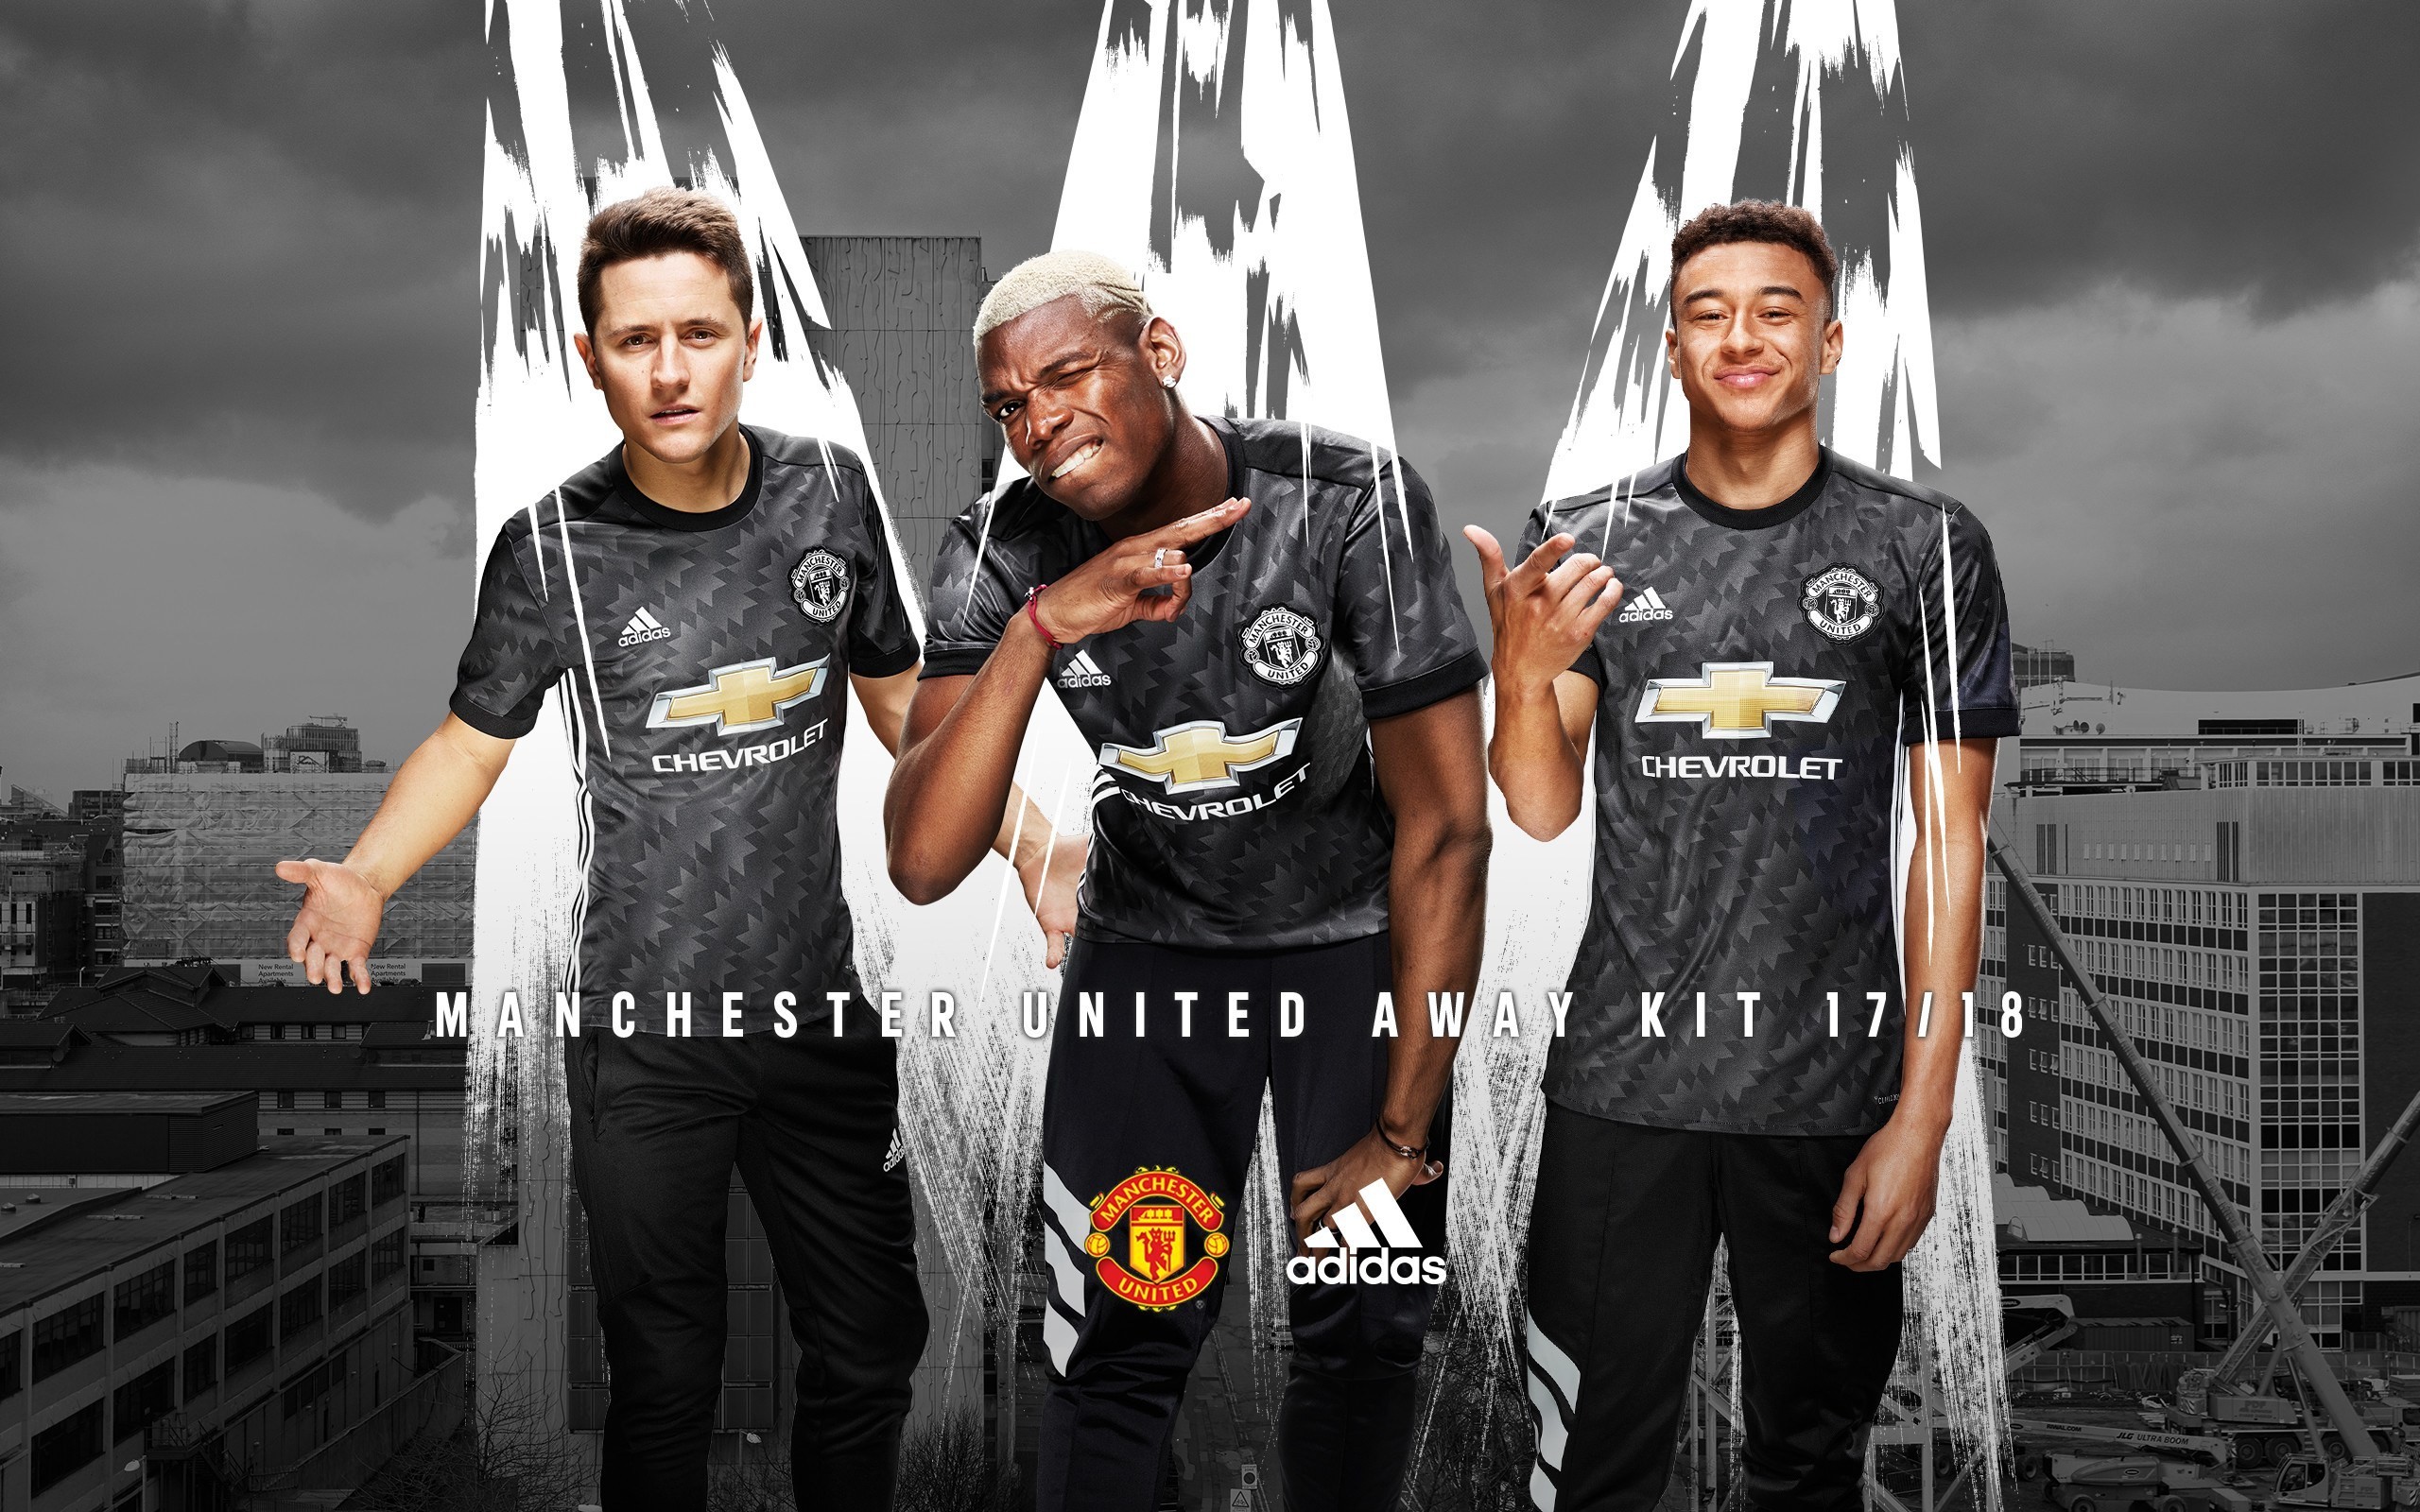 2560x1600 Manchester United Hd Wallpapers 2022 88 Images 1920x1080 Man Utd Away Kit 2022 18 Manchester 2560x1600